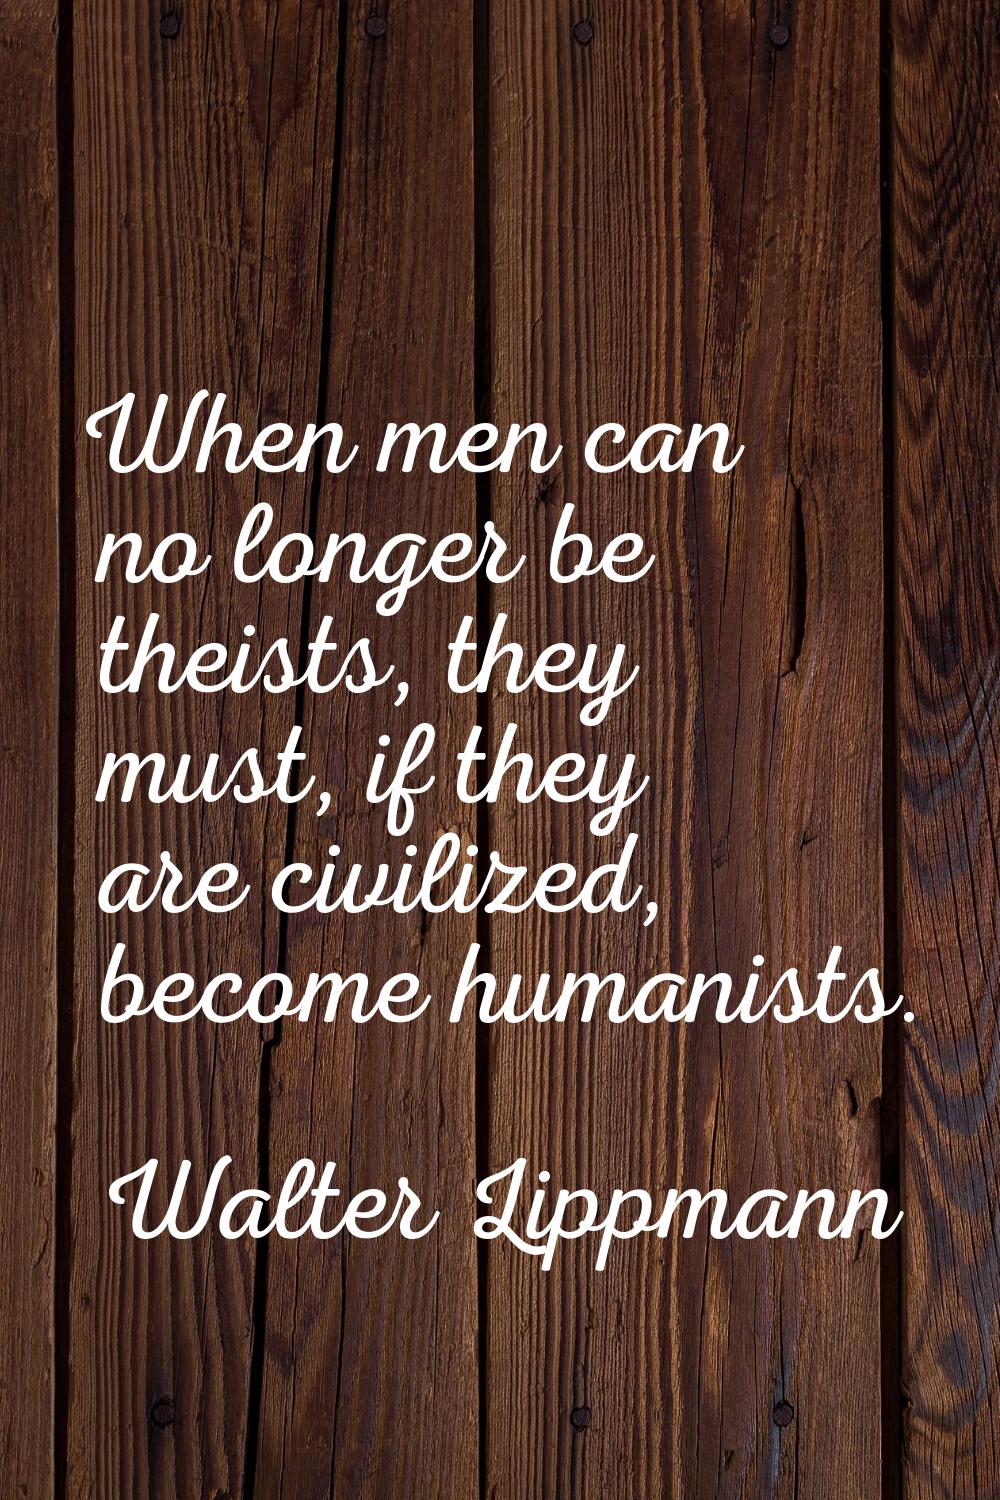 When men can no longer be theists, they must, if they are civilized, become humanists.